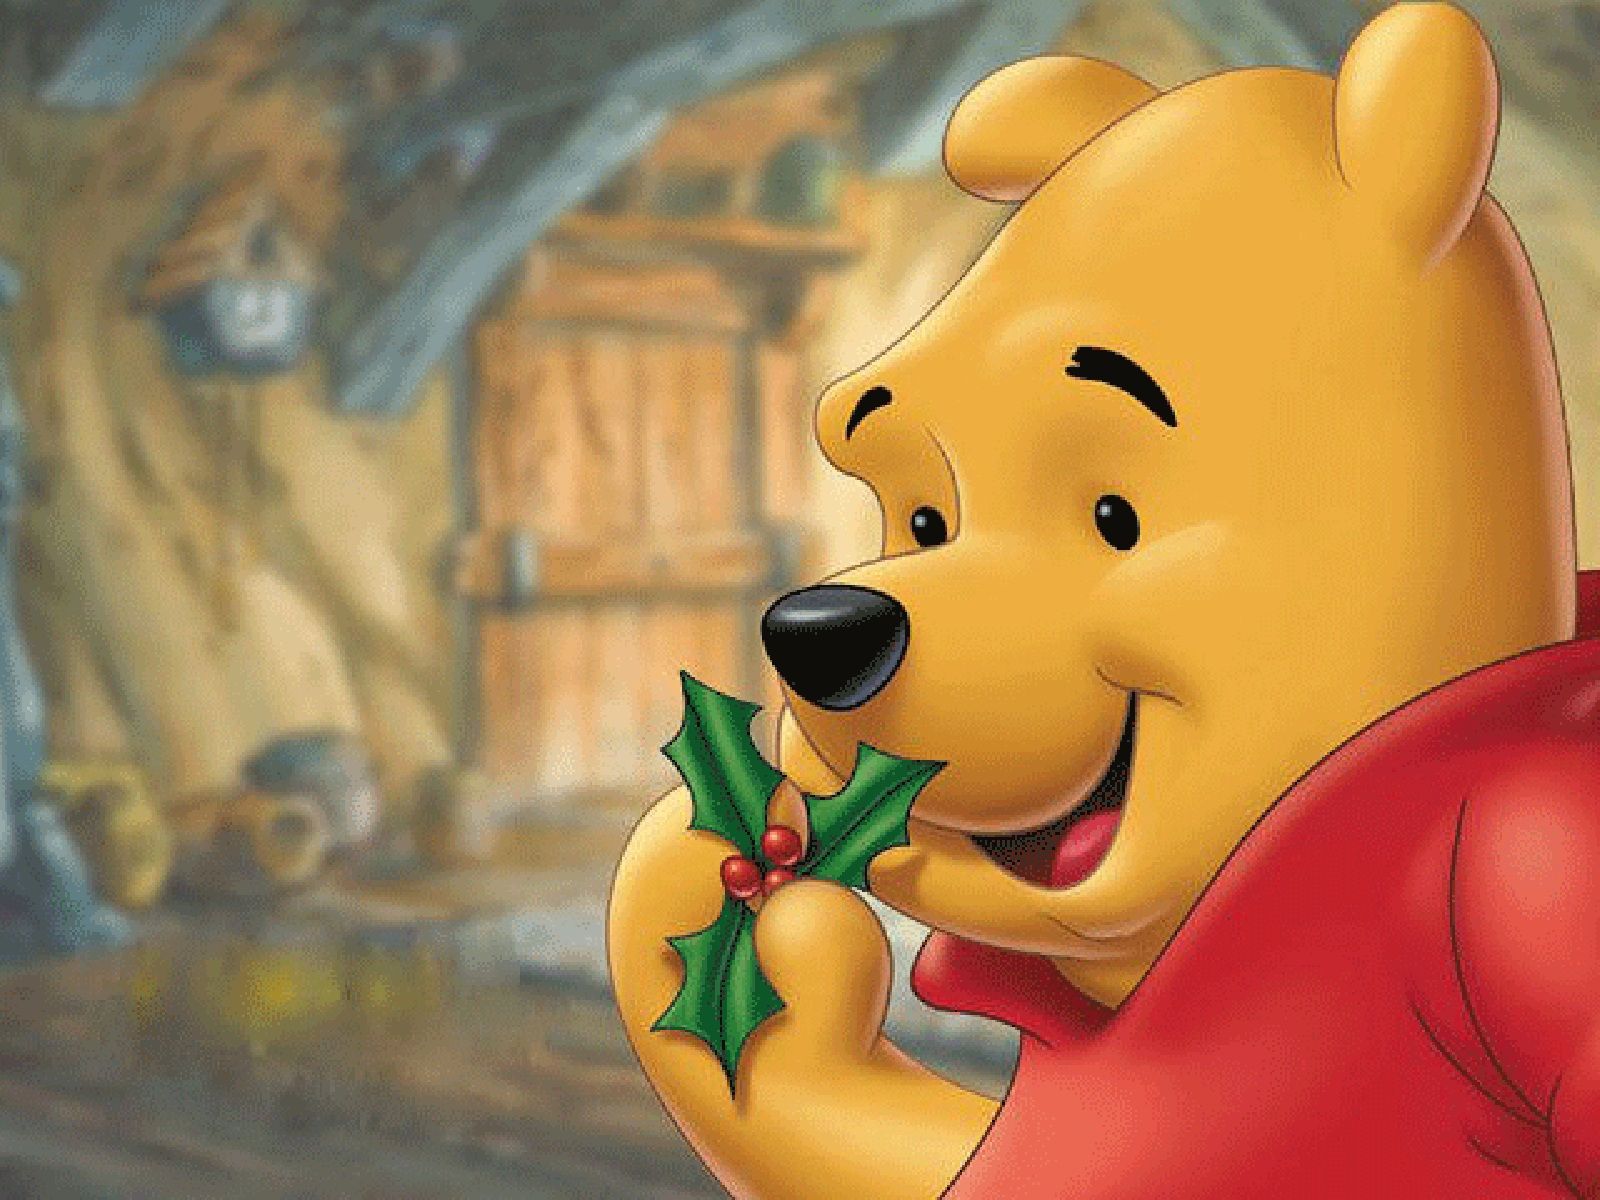 Cartoons Winnie The Pooh Wallpaper - Free high quality background ...